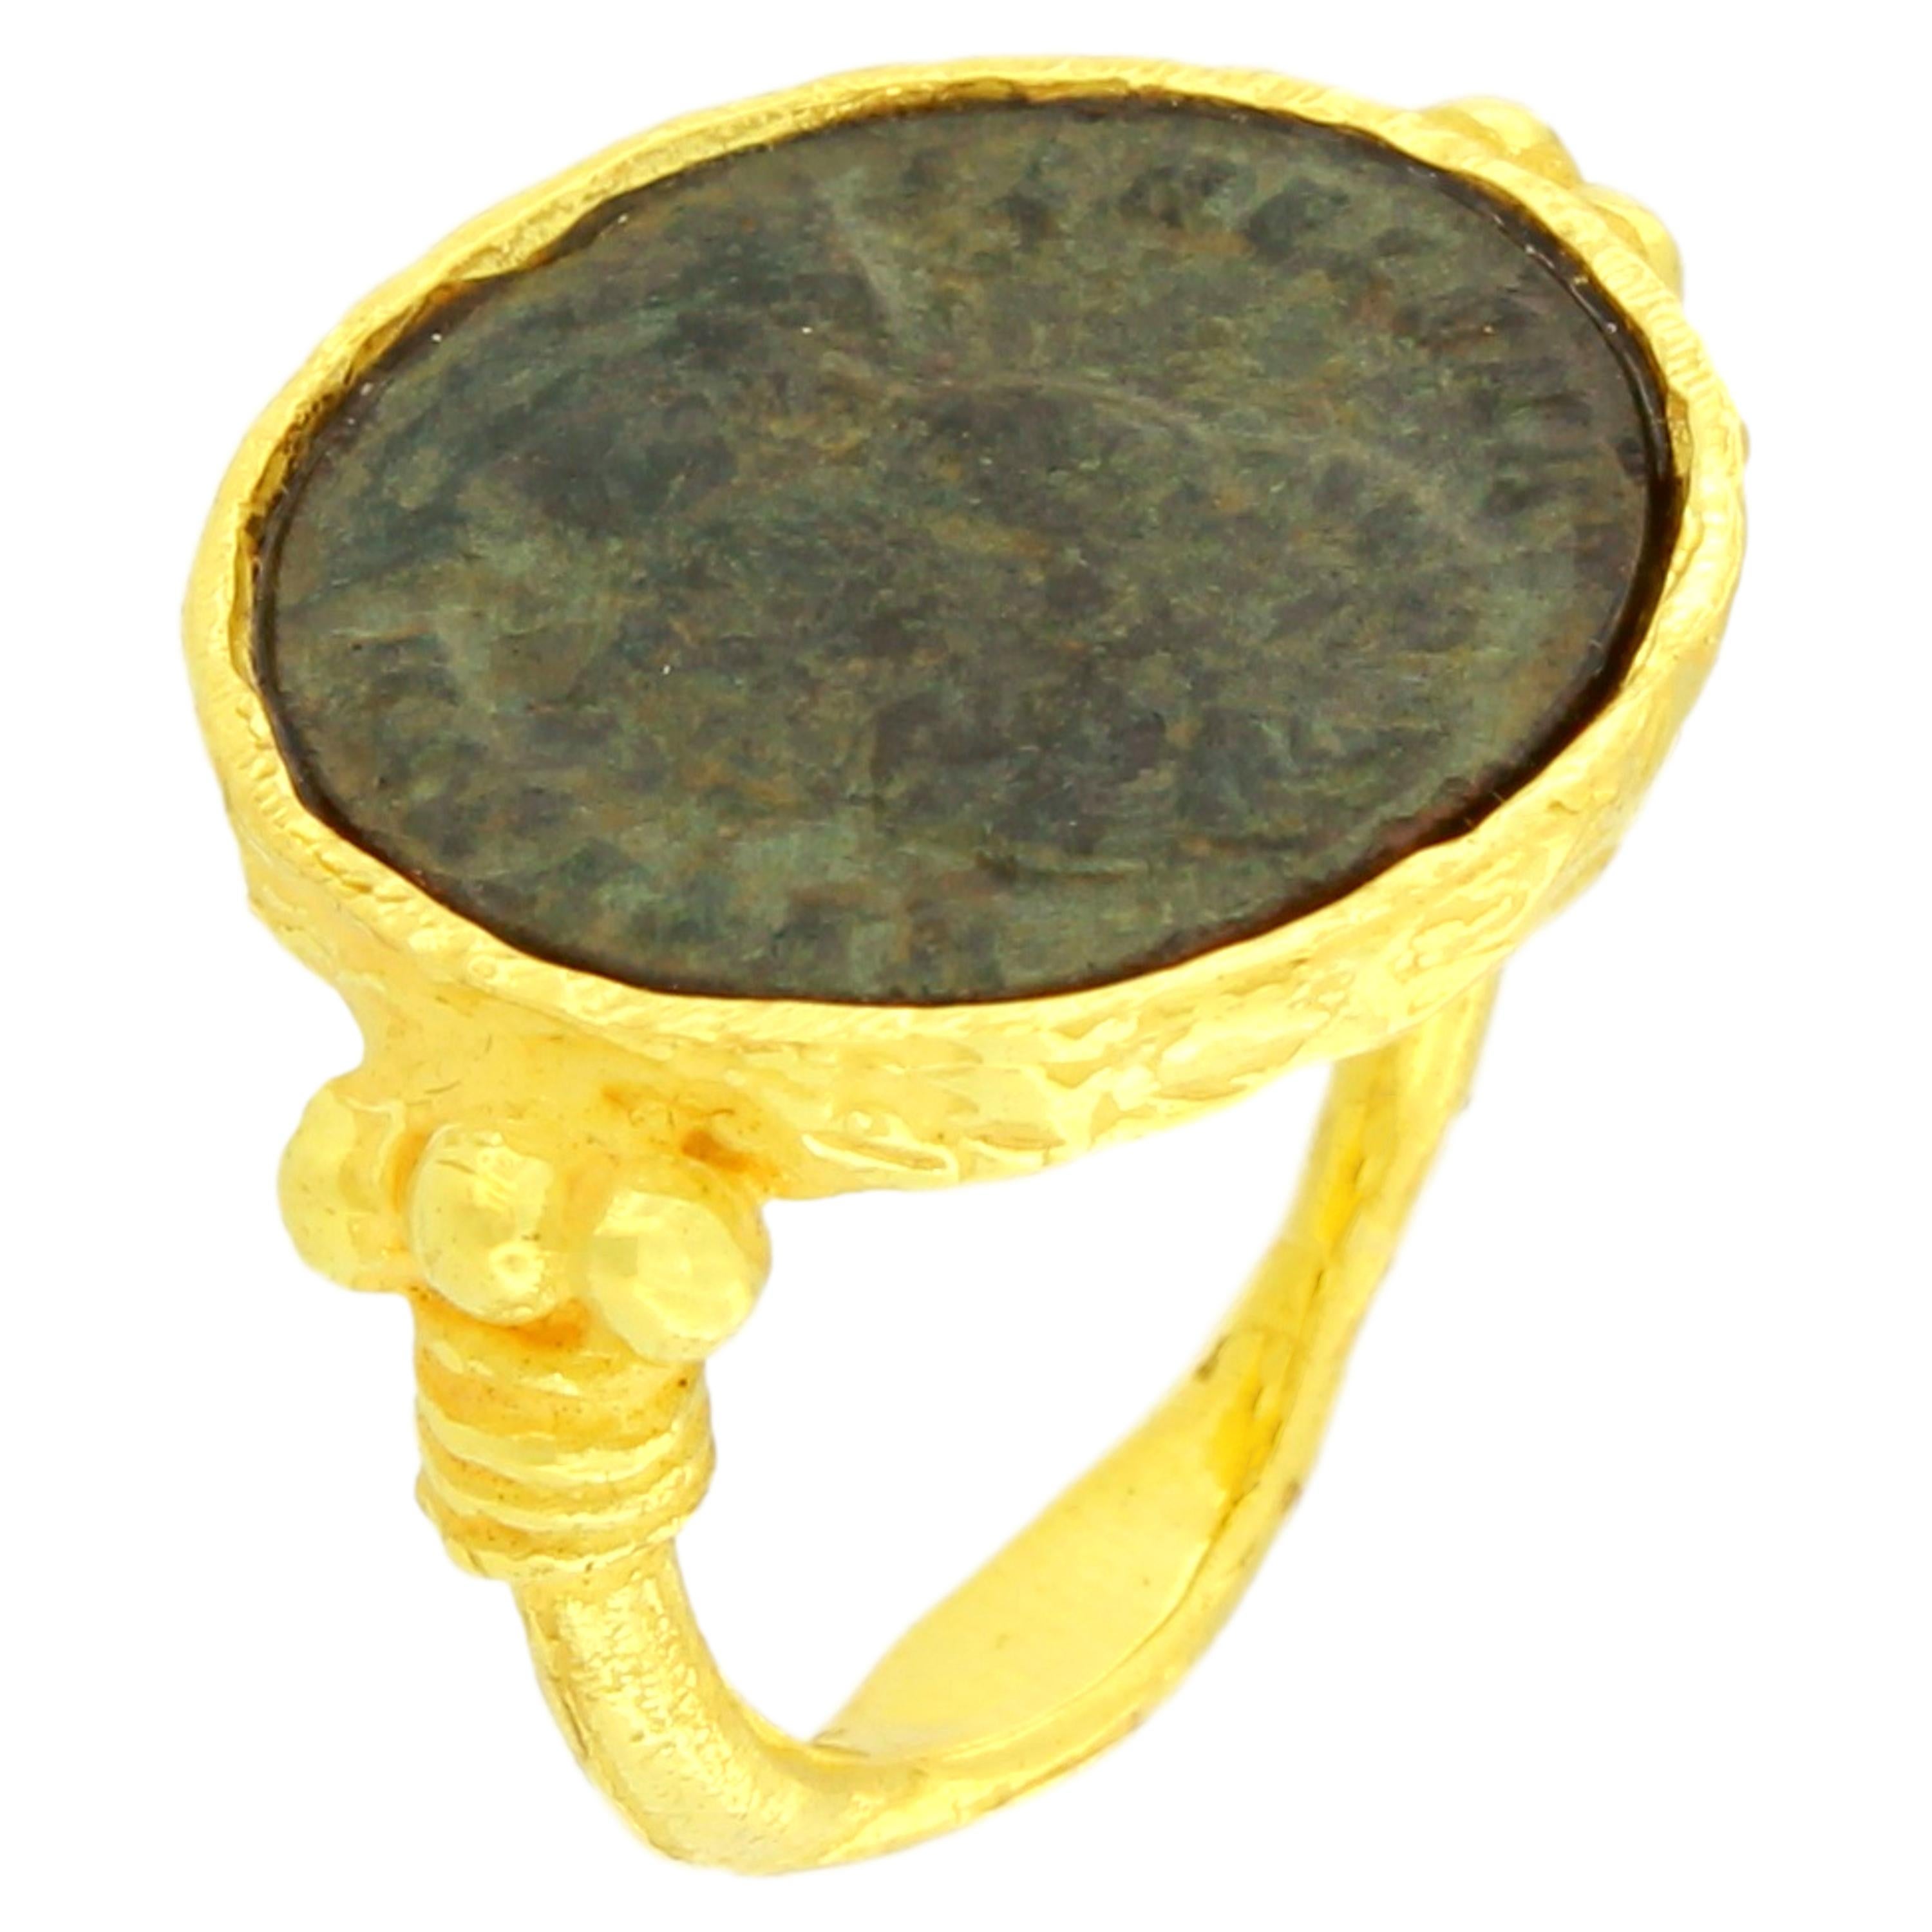 Antique Roman Coin Satin Yellow Gold Ring, from Sacchi’s 